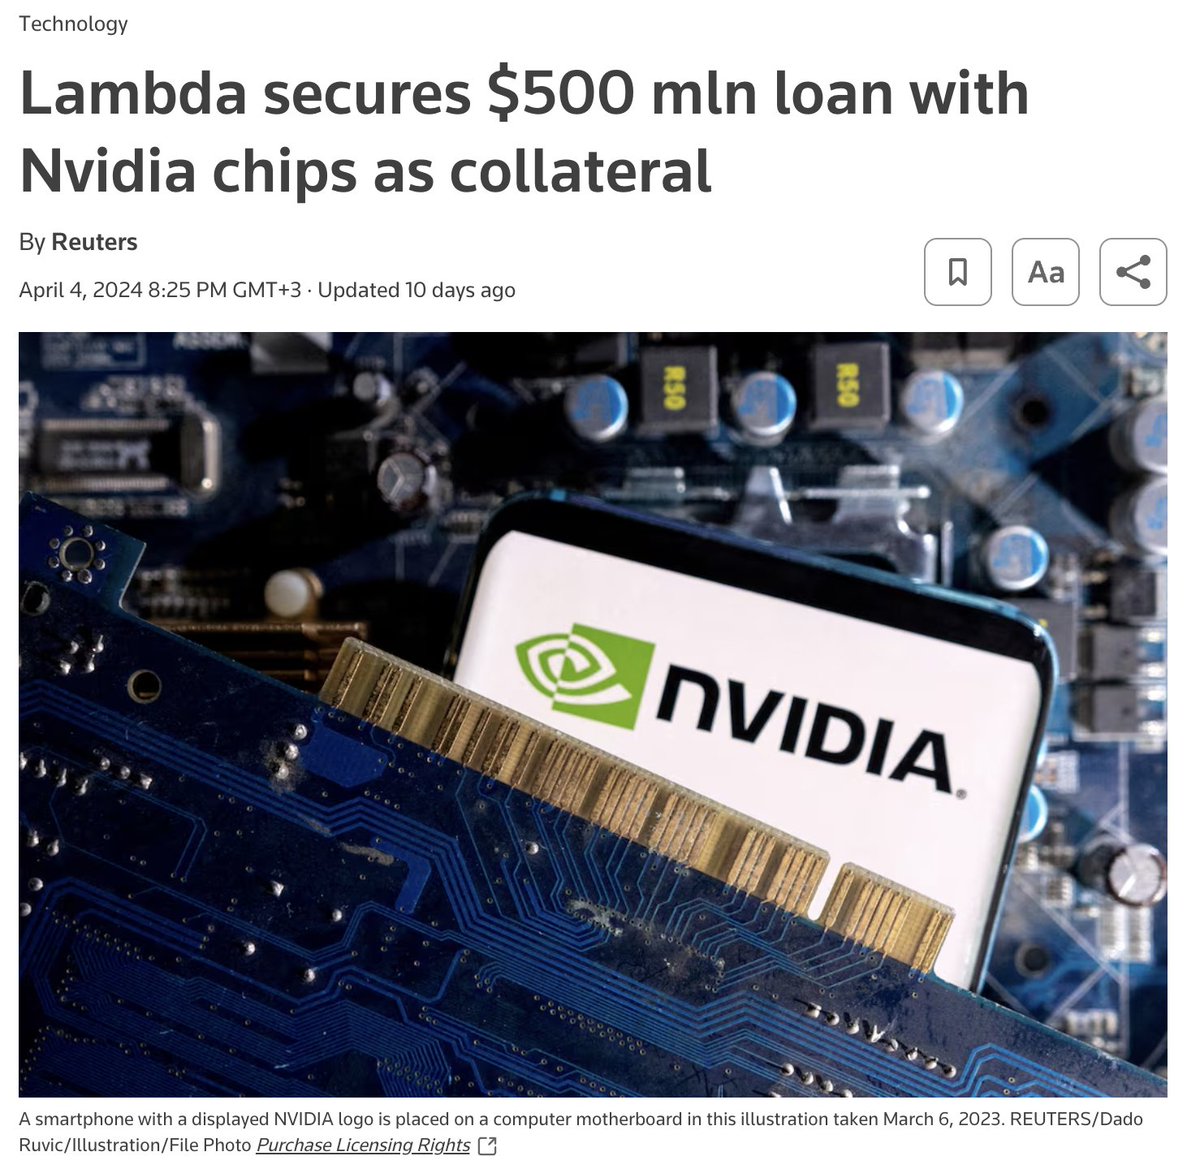 As Wall Street increases pressure on Nvidia to meet their guidance, we can expect to see more loans with chips as collateral first invented by CoreWeave. I'll share more details about Lambda soon.